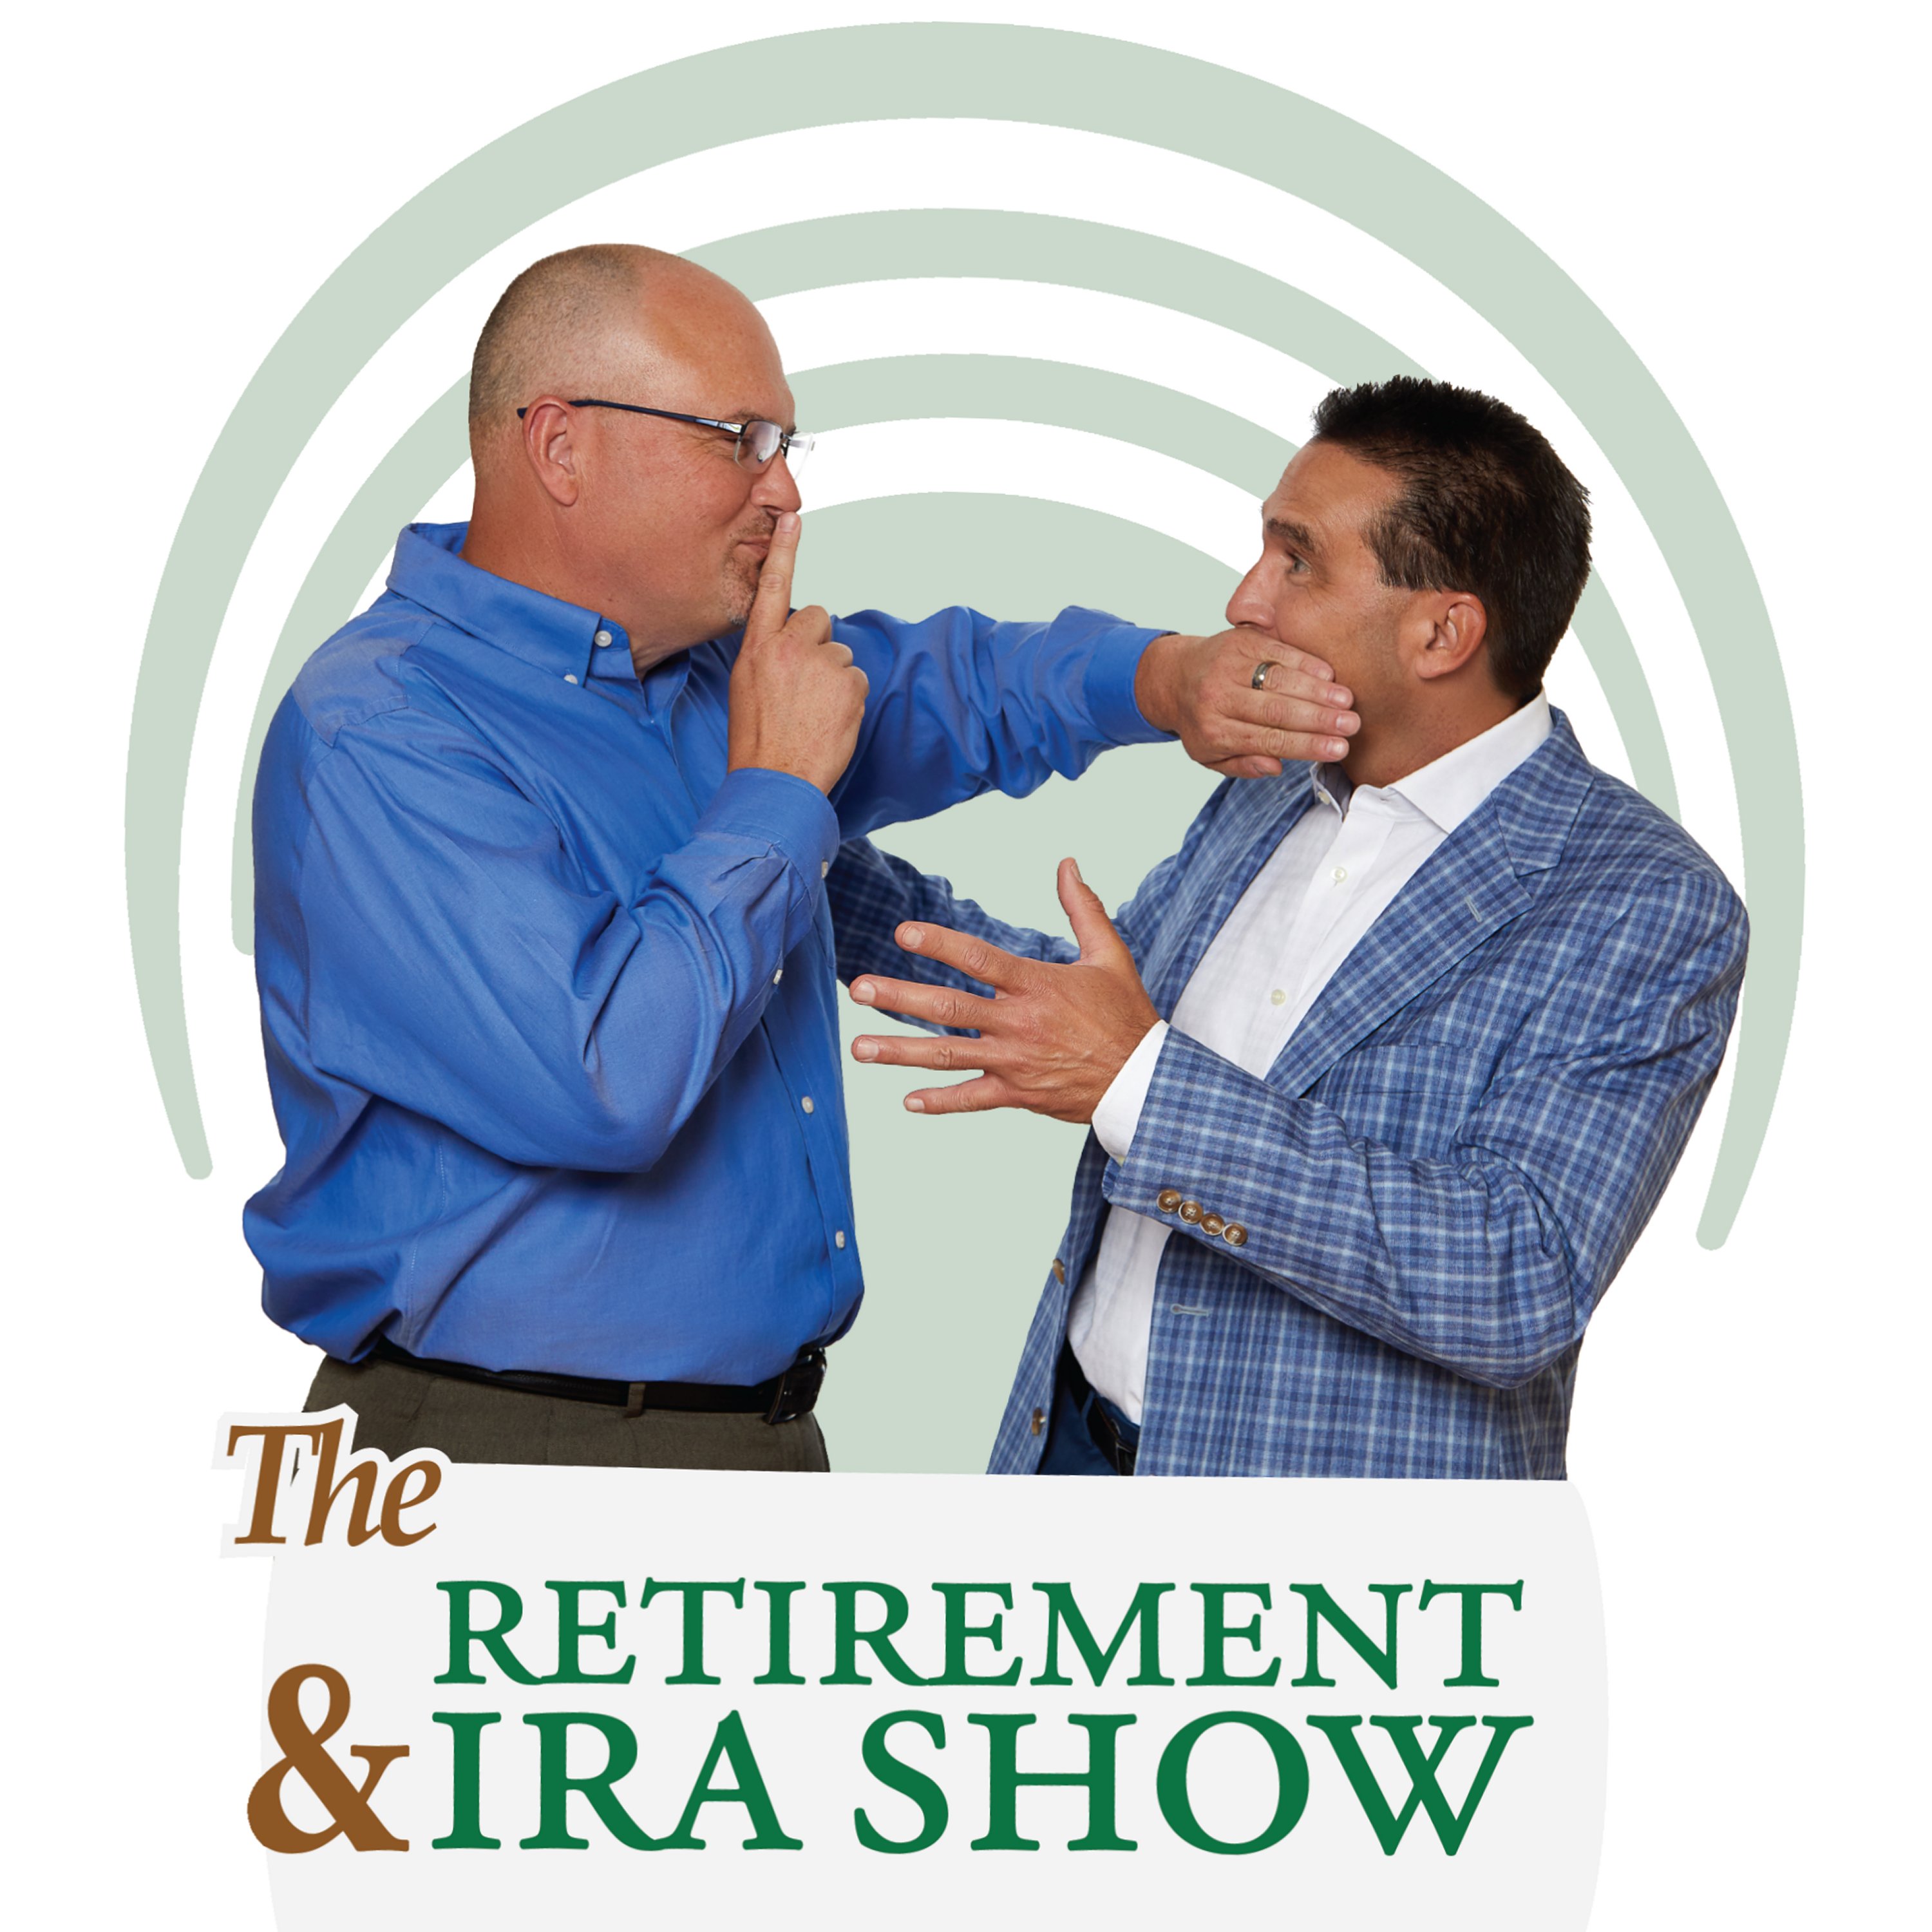 The Retirement and IRA Show